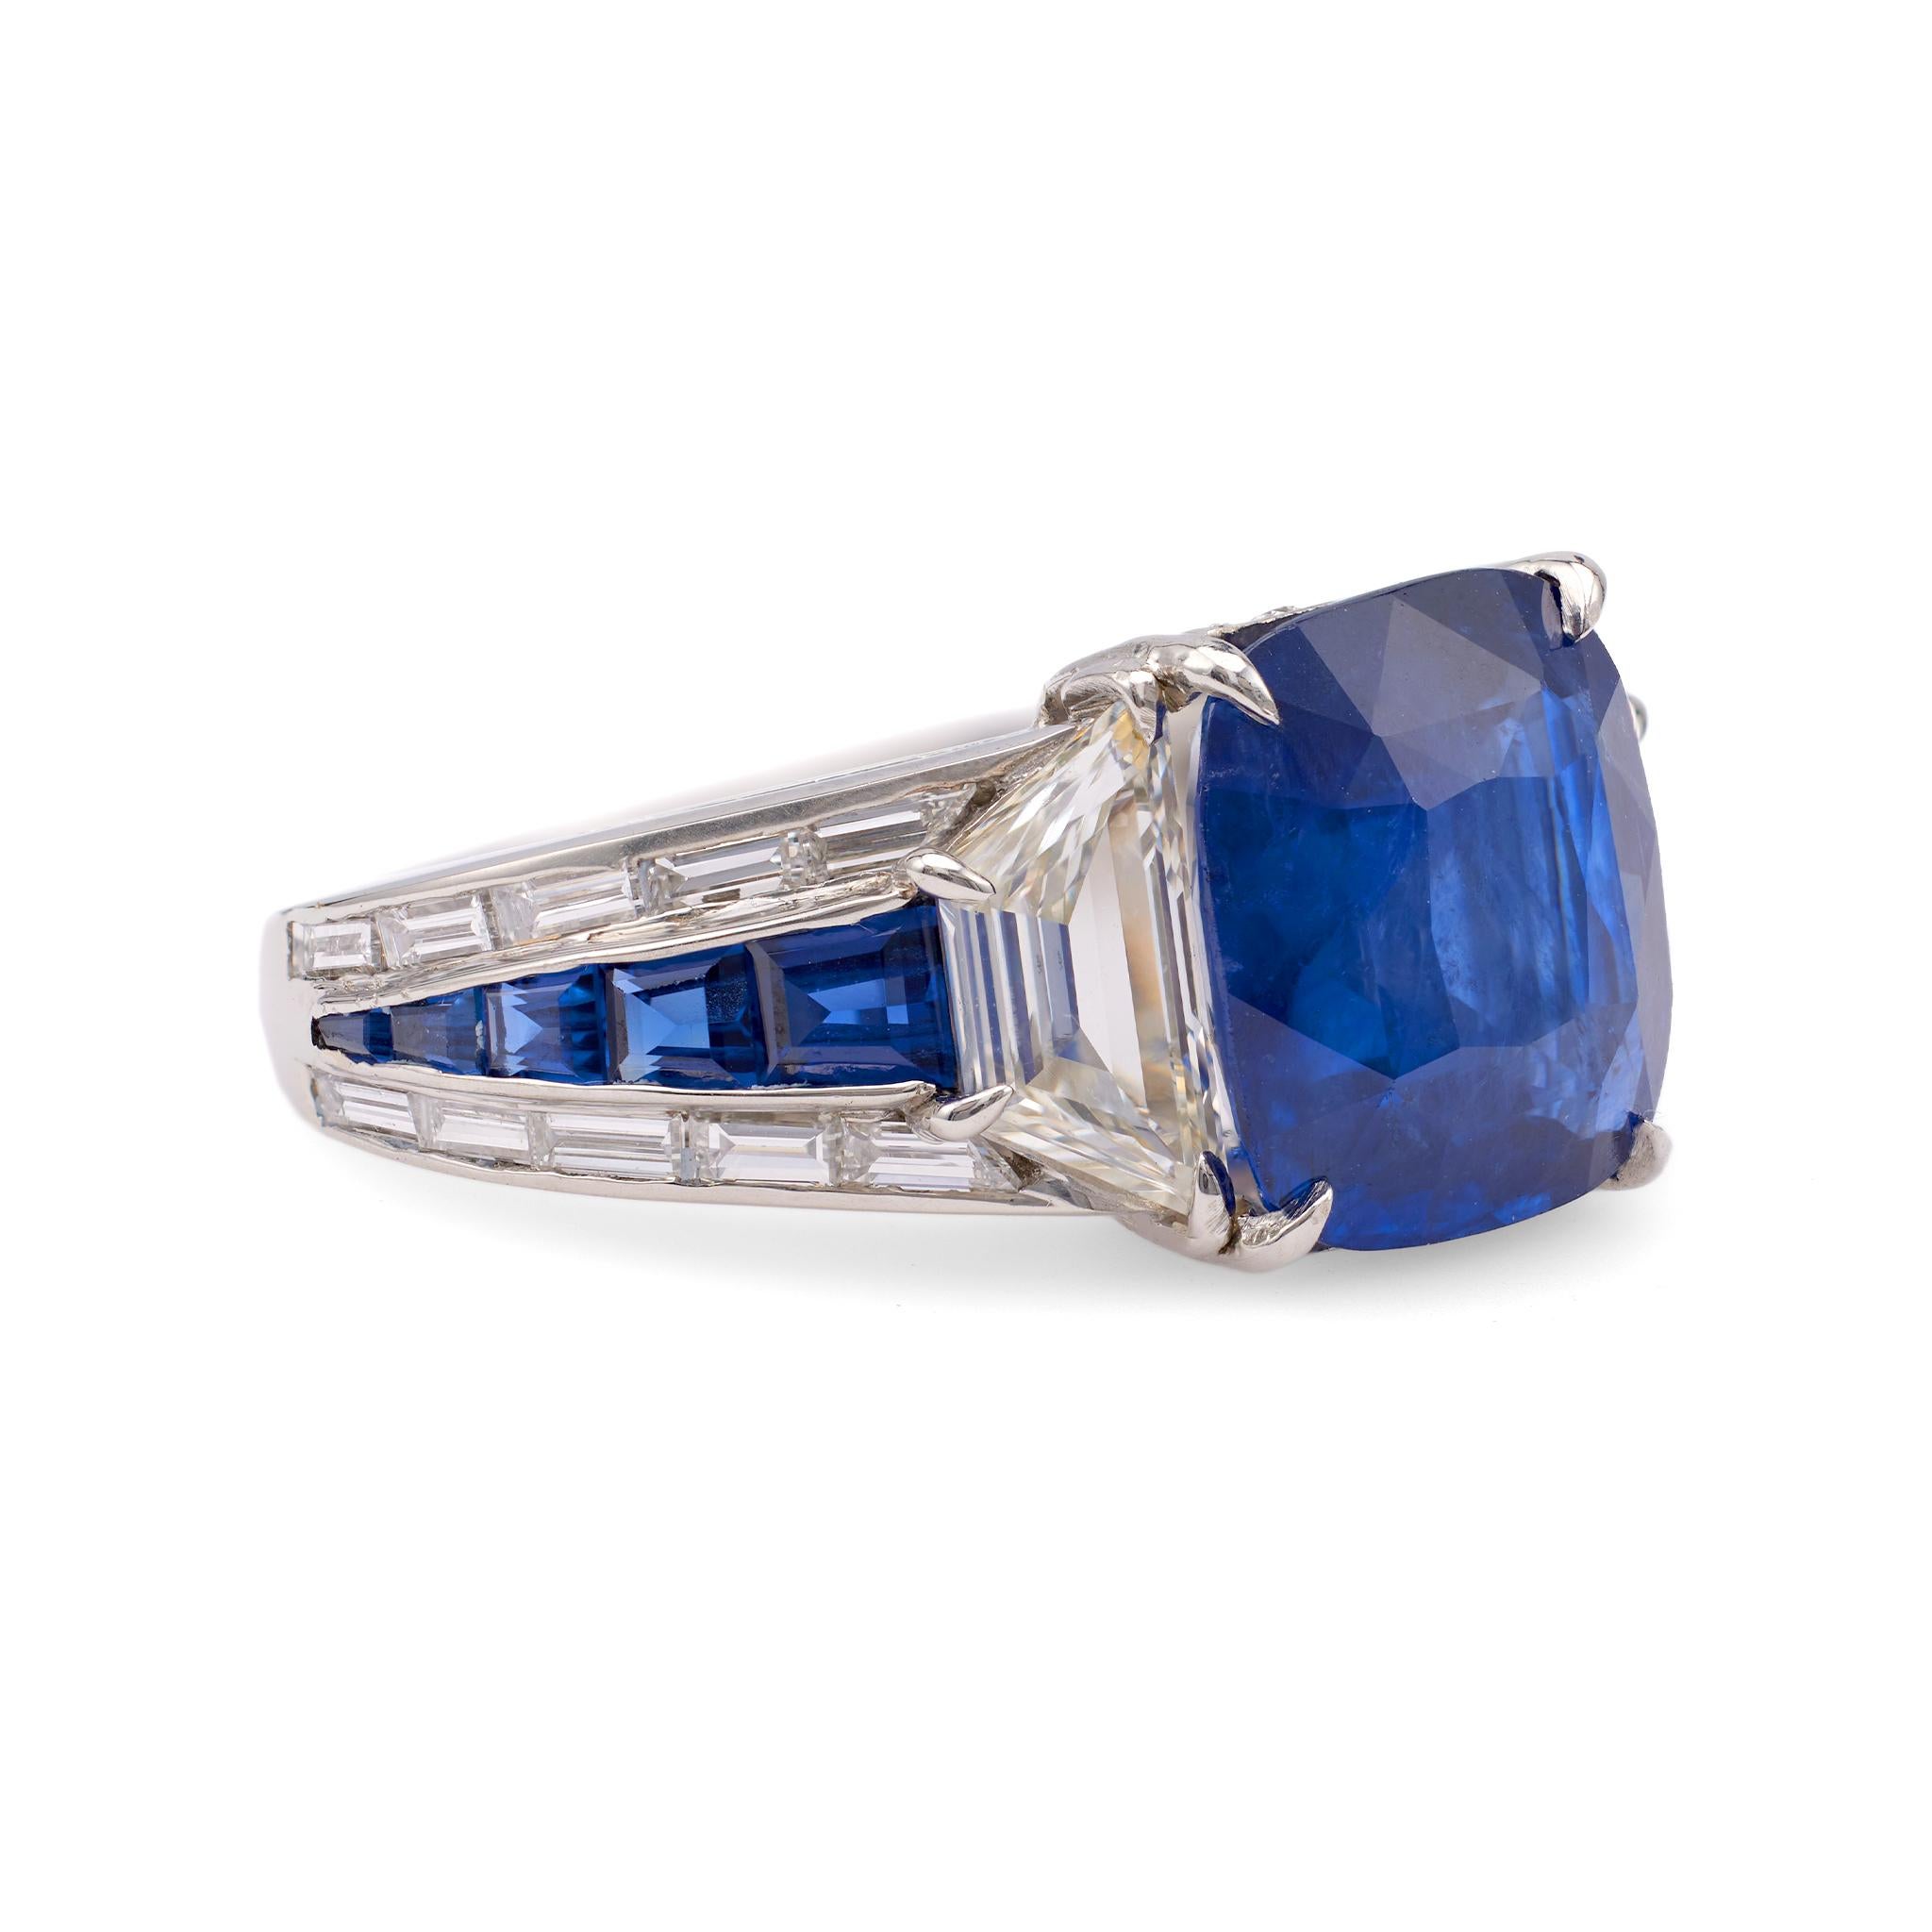 Vintage GIA 5.51 Carat Ceylon Sapphire Diamond Platinum Ring In Excellent Condition For Sale In Beverly Hills, CA